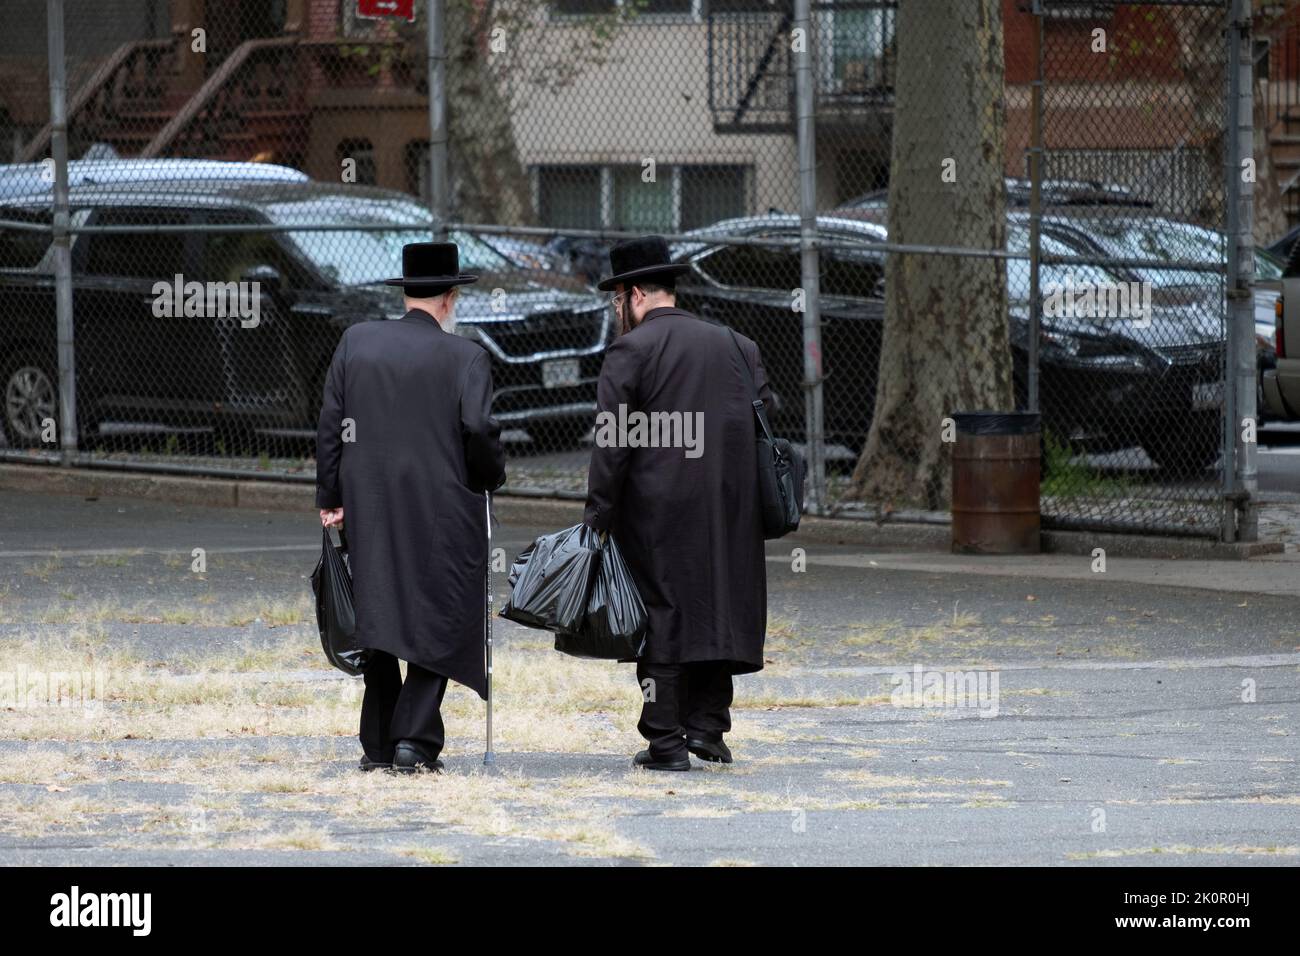 Two Hasidic Jewish men, possibly family, return home from shopping taking a shortcut through a schoolyard. In Williamsburg, Brooklyn, New York. Stock Photo